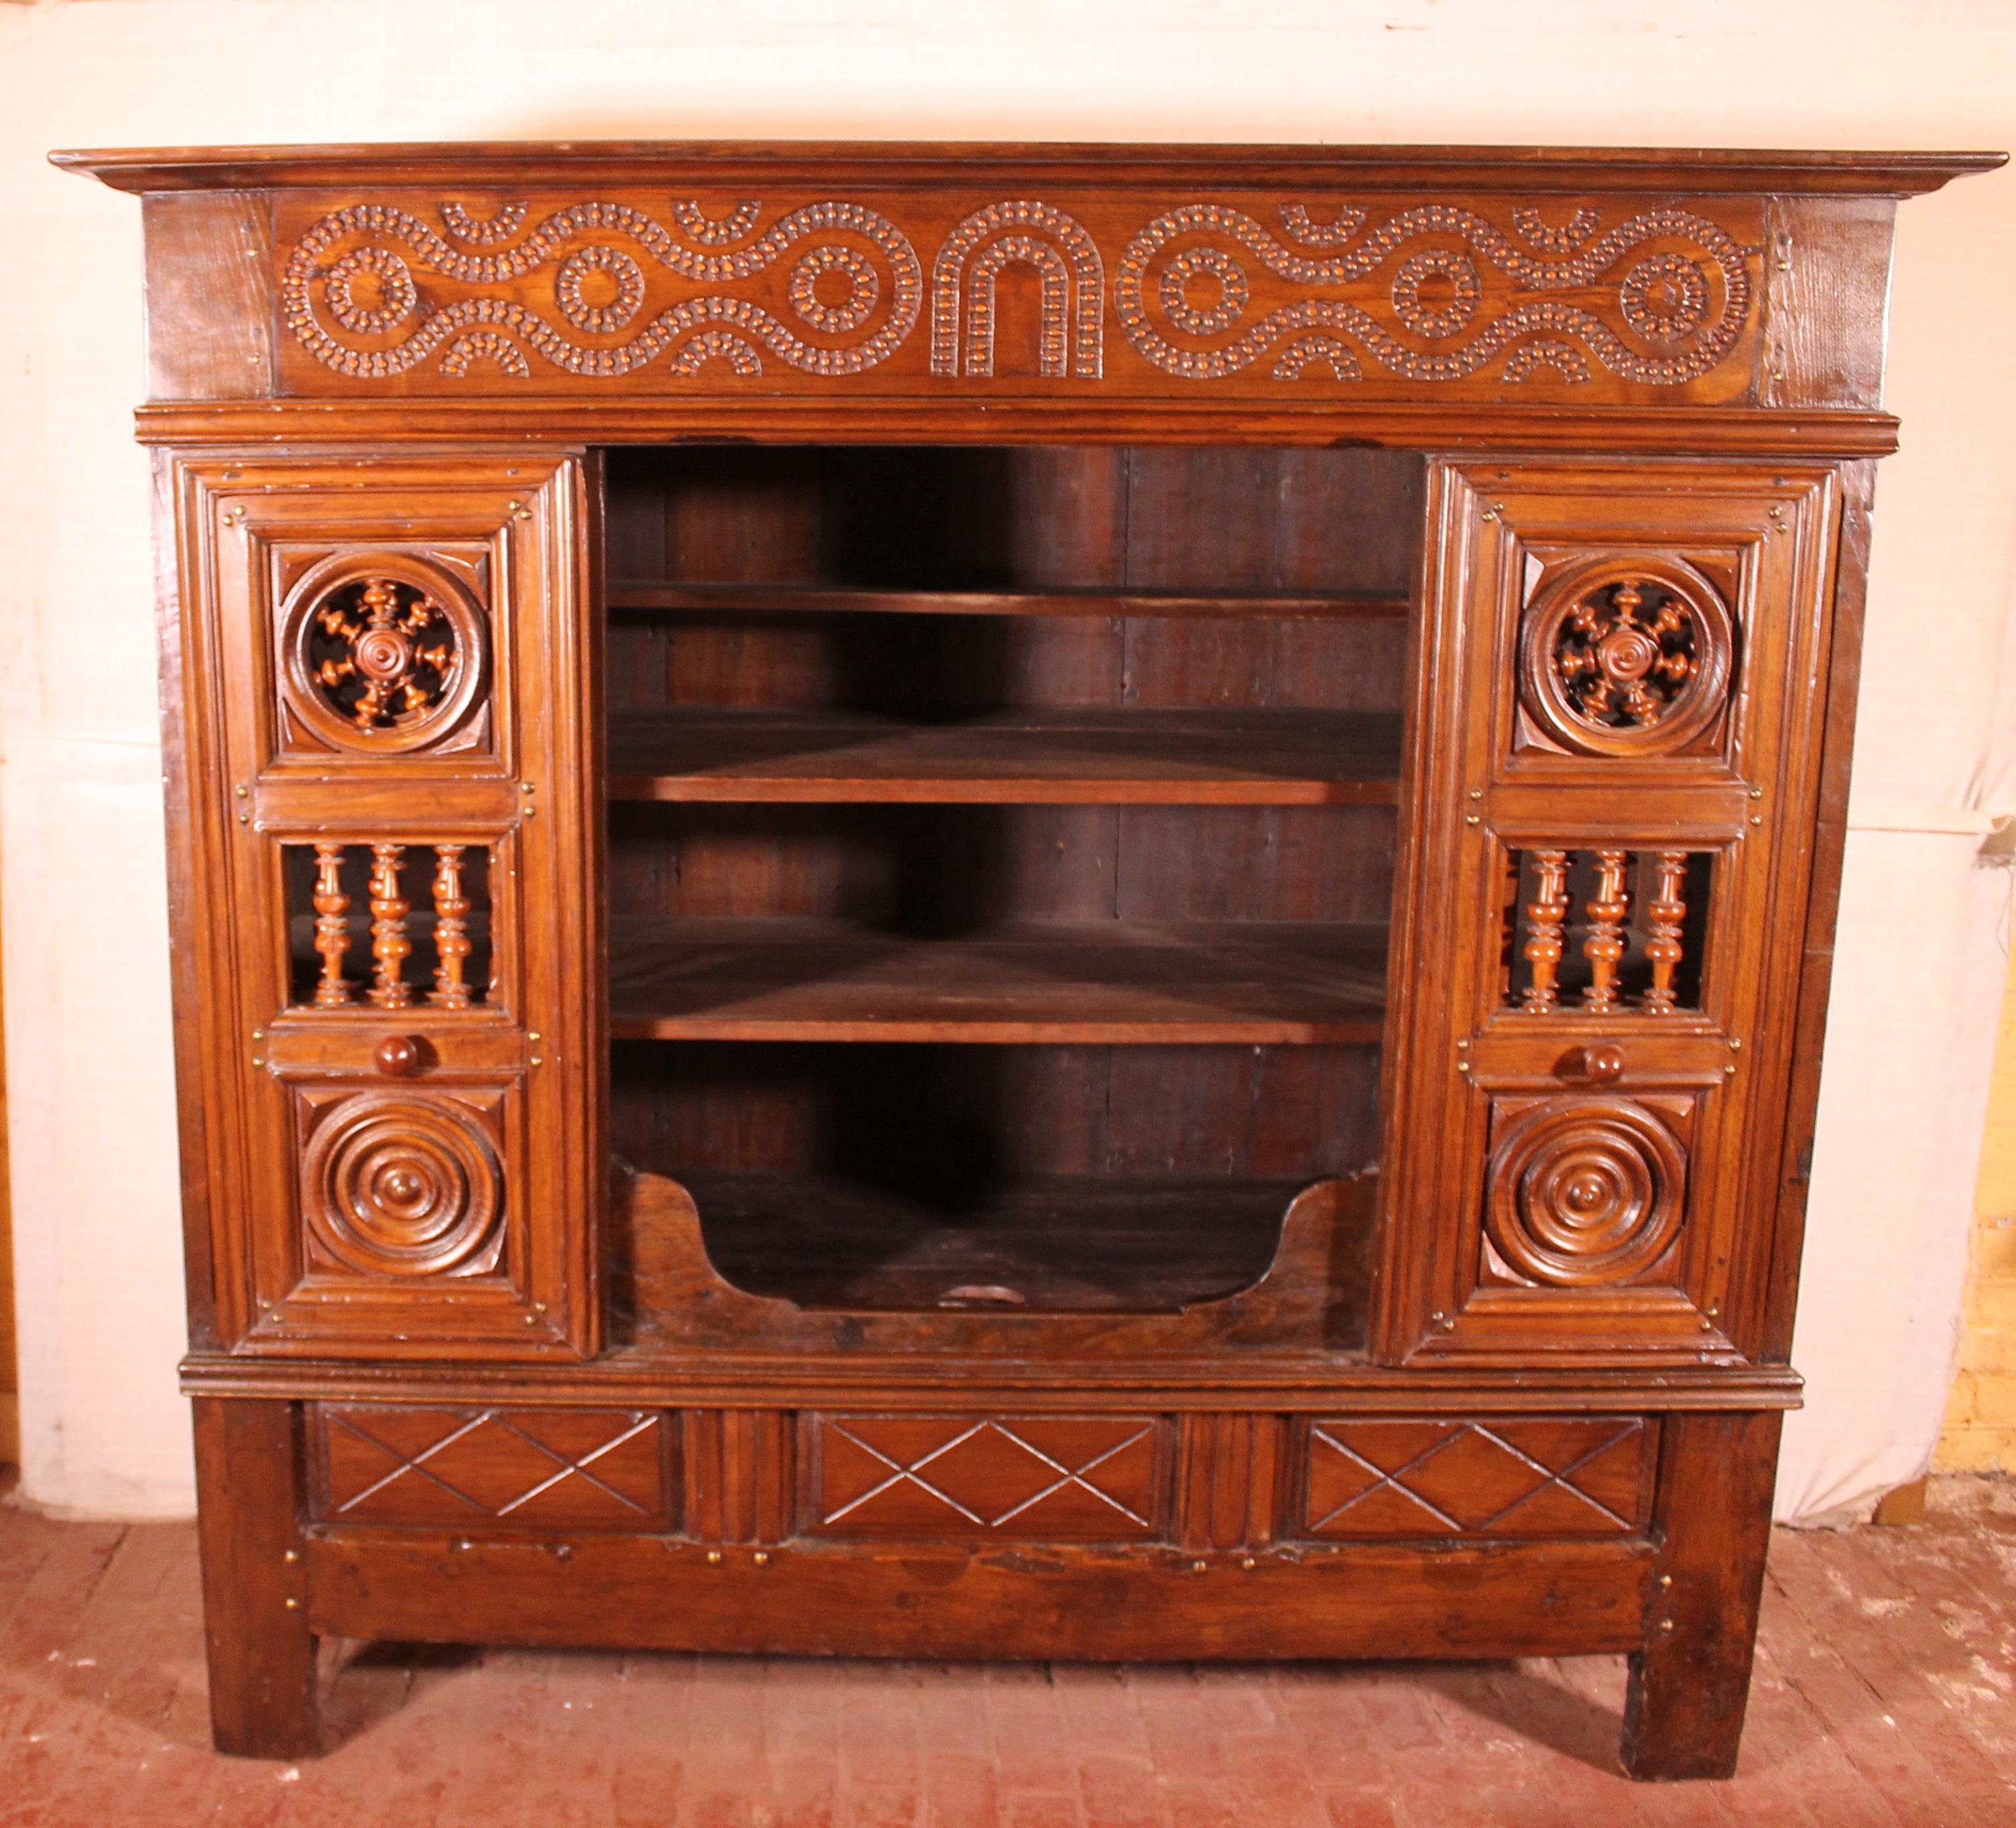 A fine wardrobe or cupboardof of the 17th century in oak and turning in boxwood other times alcove bed transformed into a wardrobe or cupboard probably in the 19th century

The interior is organised with 3 shelves and 1 box in the